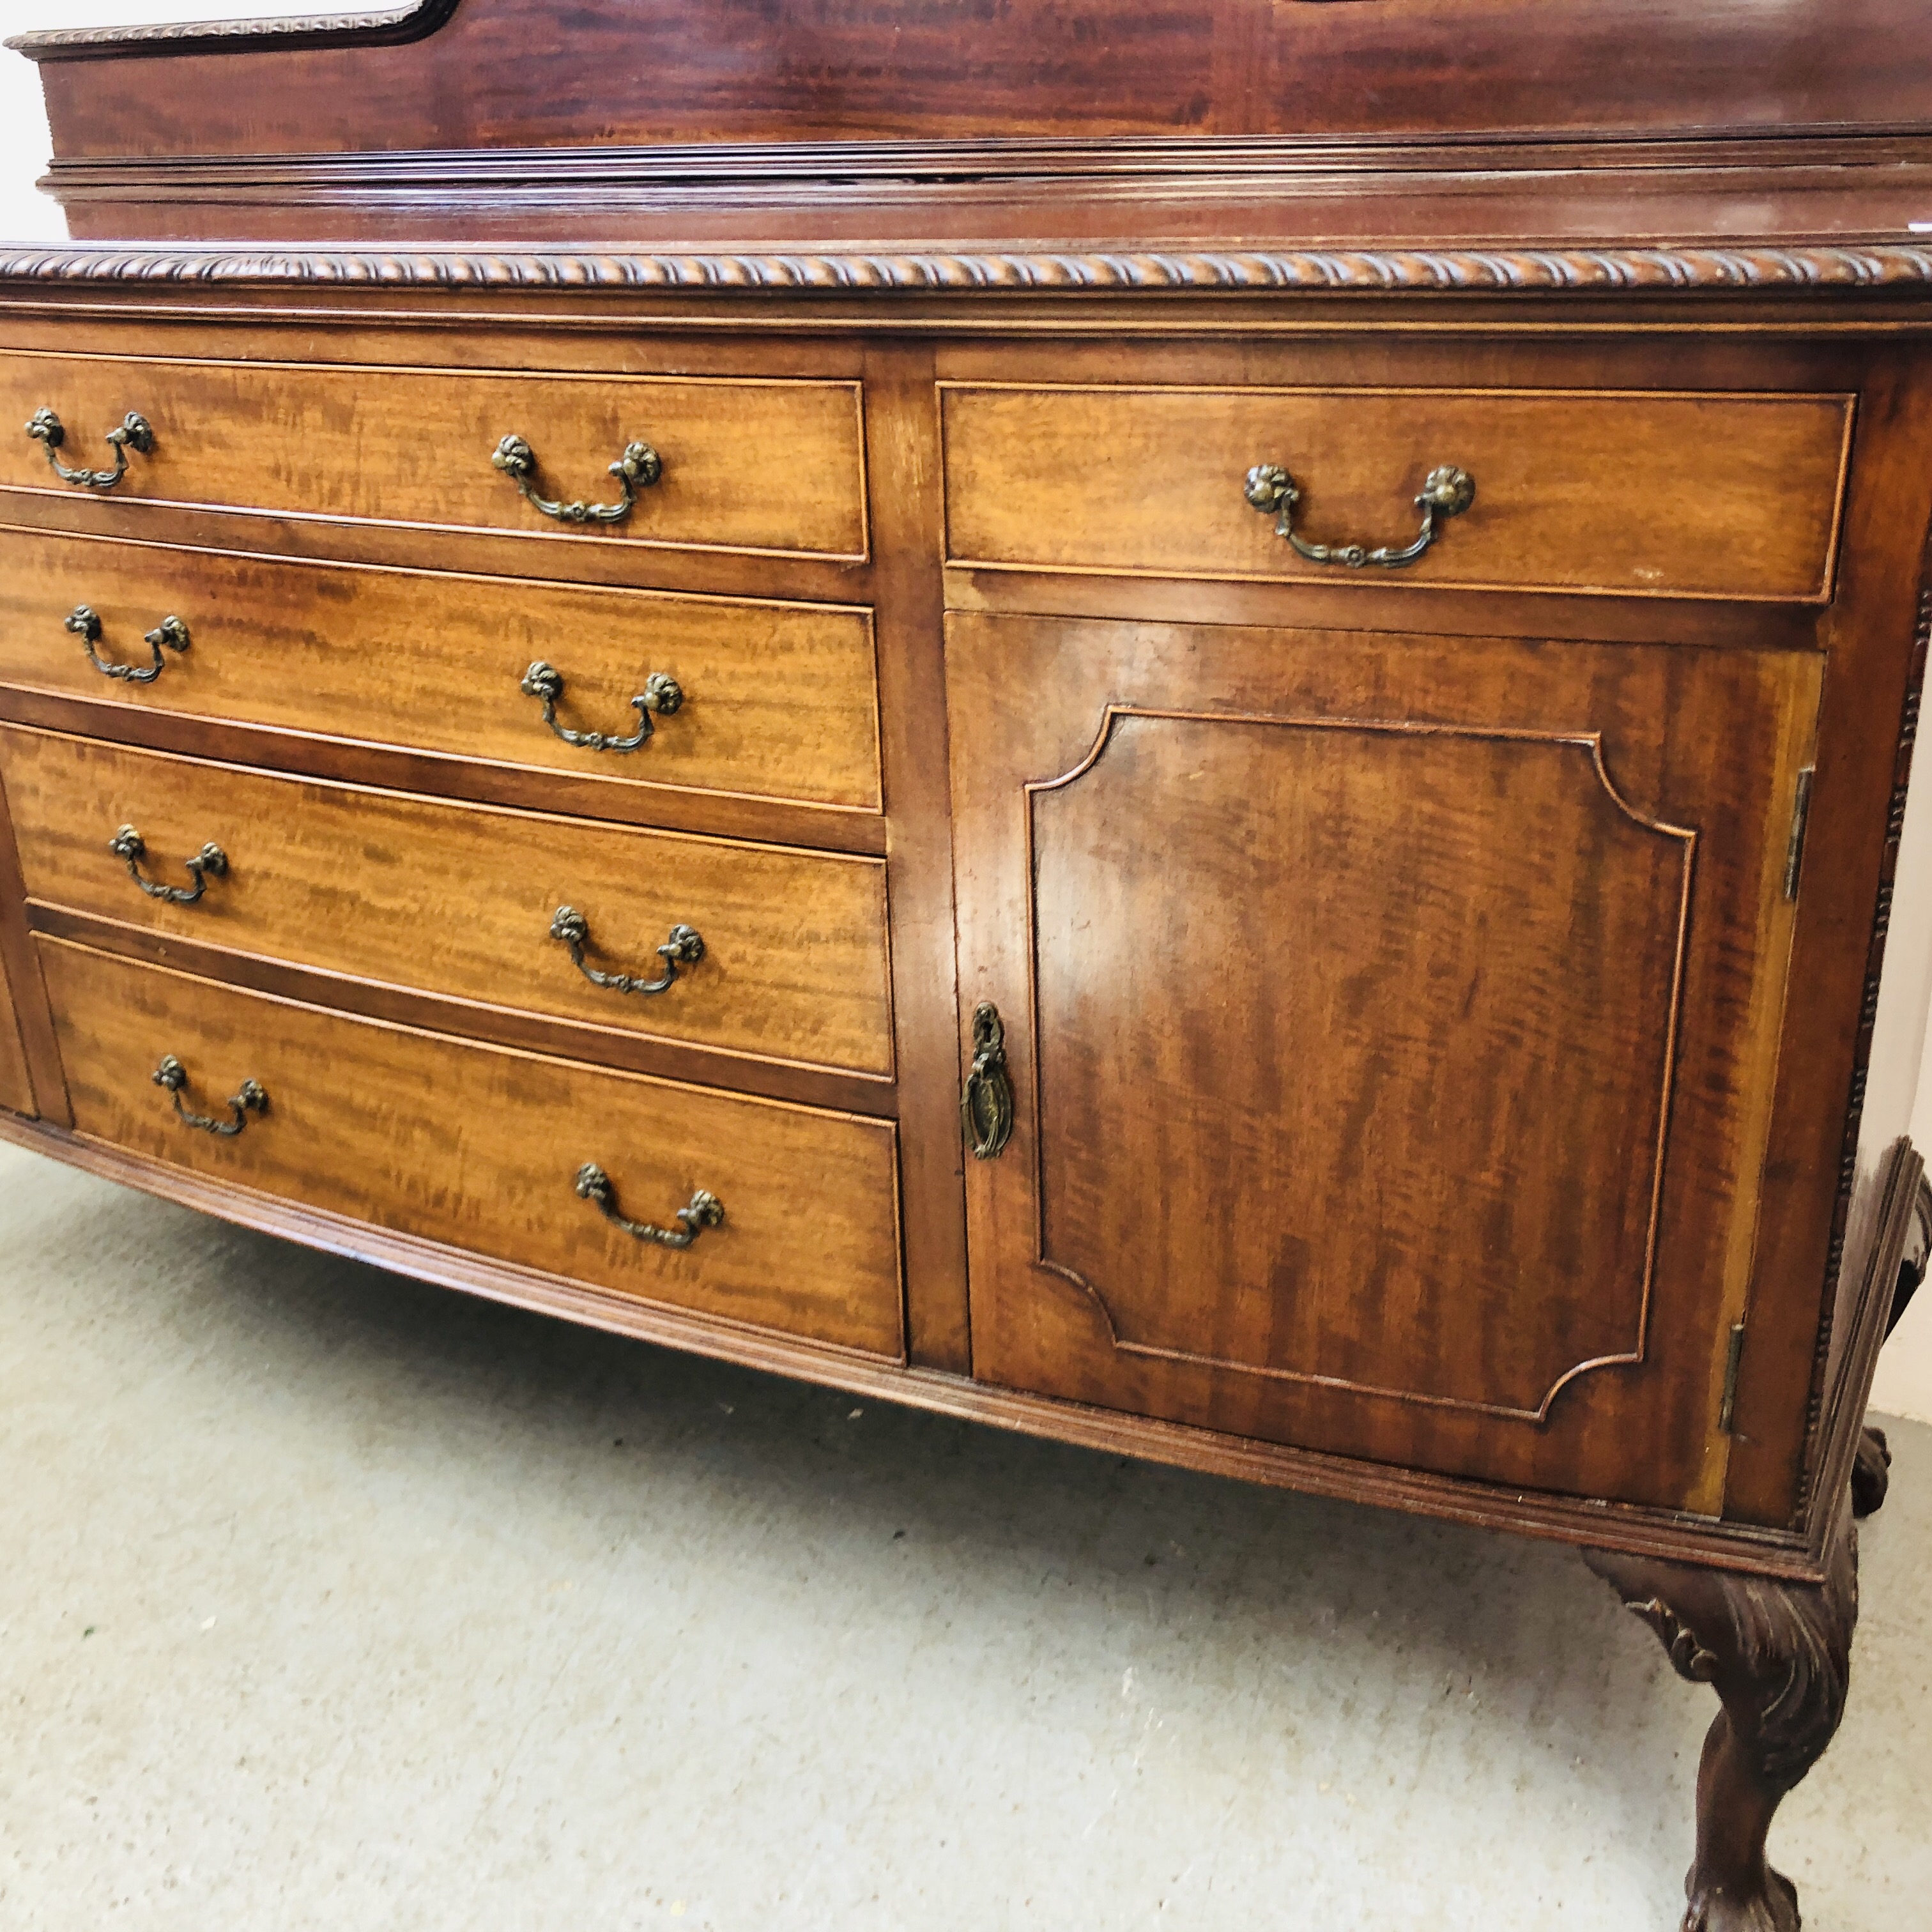 LARGE MAHOGANY BOW FRONT SIDEBOARD WITH FOUR CENTRAL DRAWERS FLANKED BY SINGLE DRAWERS AND CABINETS - Image 4 of 10